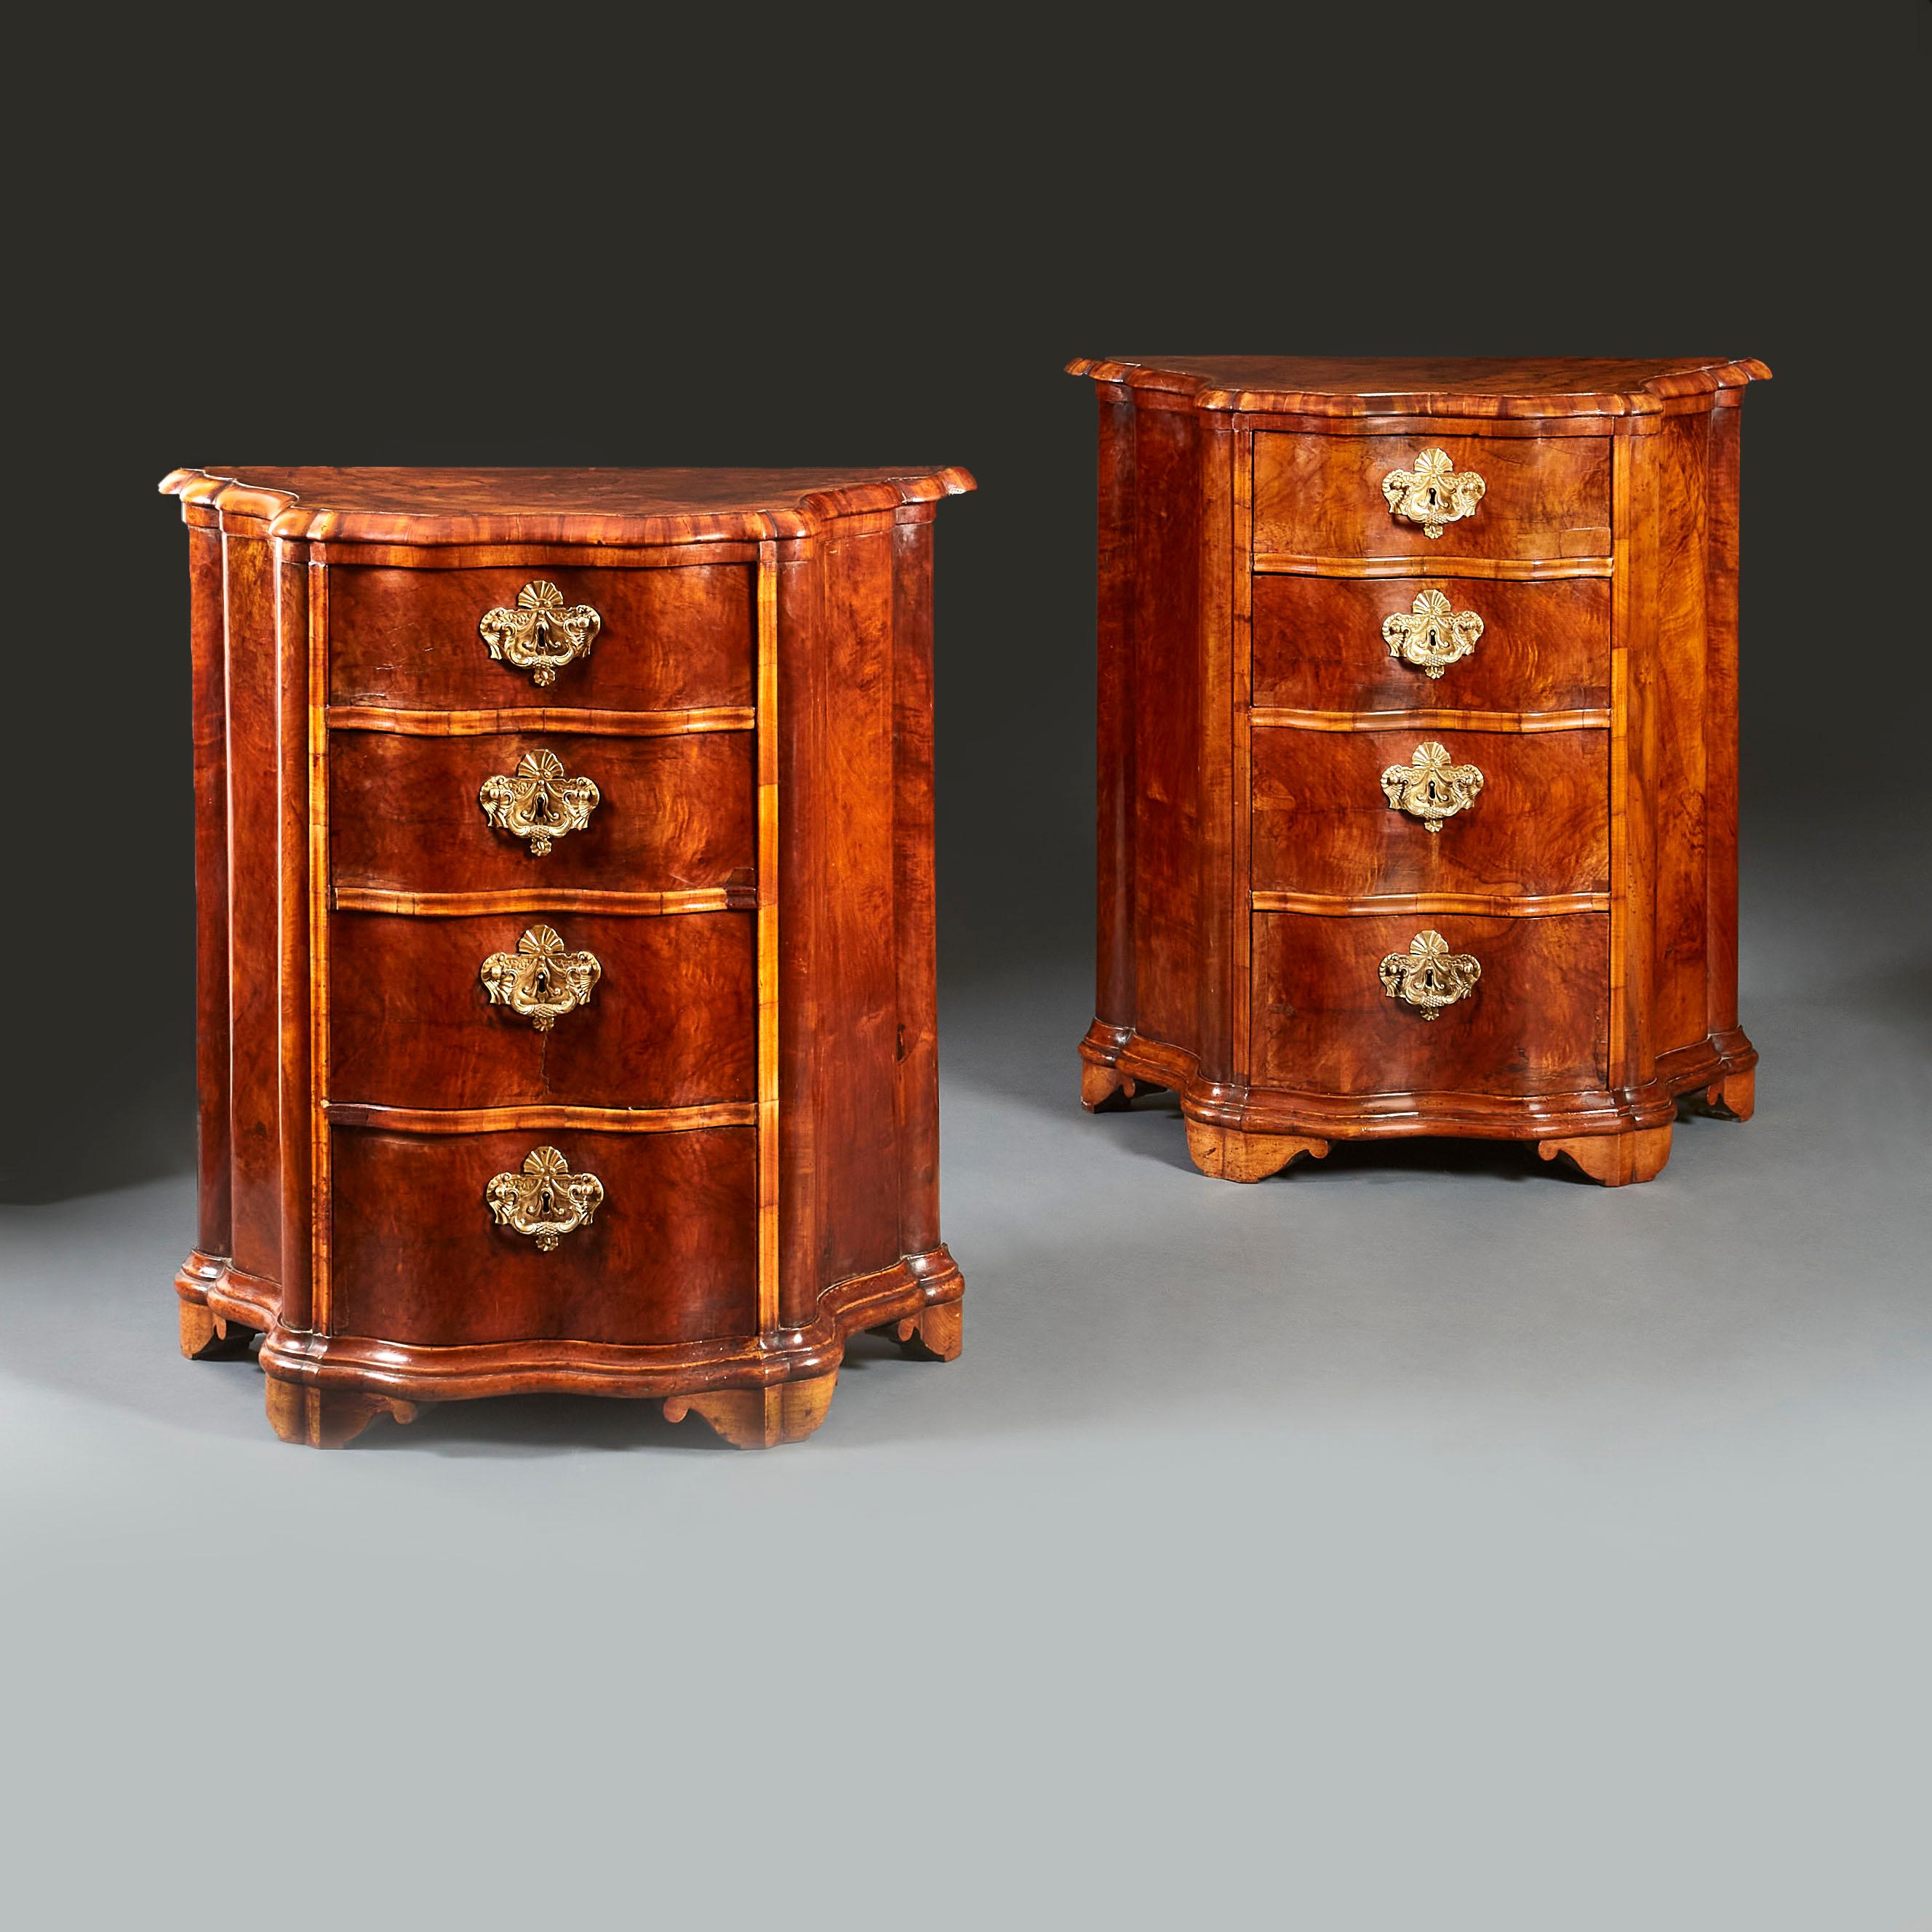 A fine pair of late eighteenth century burr walnut Italian bedside commodes, with shaped serpentine fronts, retaining the original fire gilt handles and escutcheons, raised on shaped bracket feet.